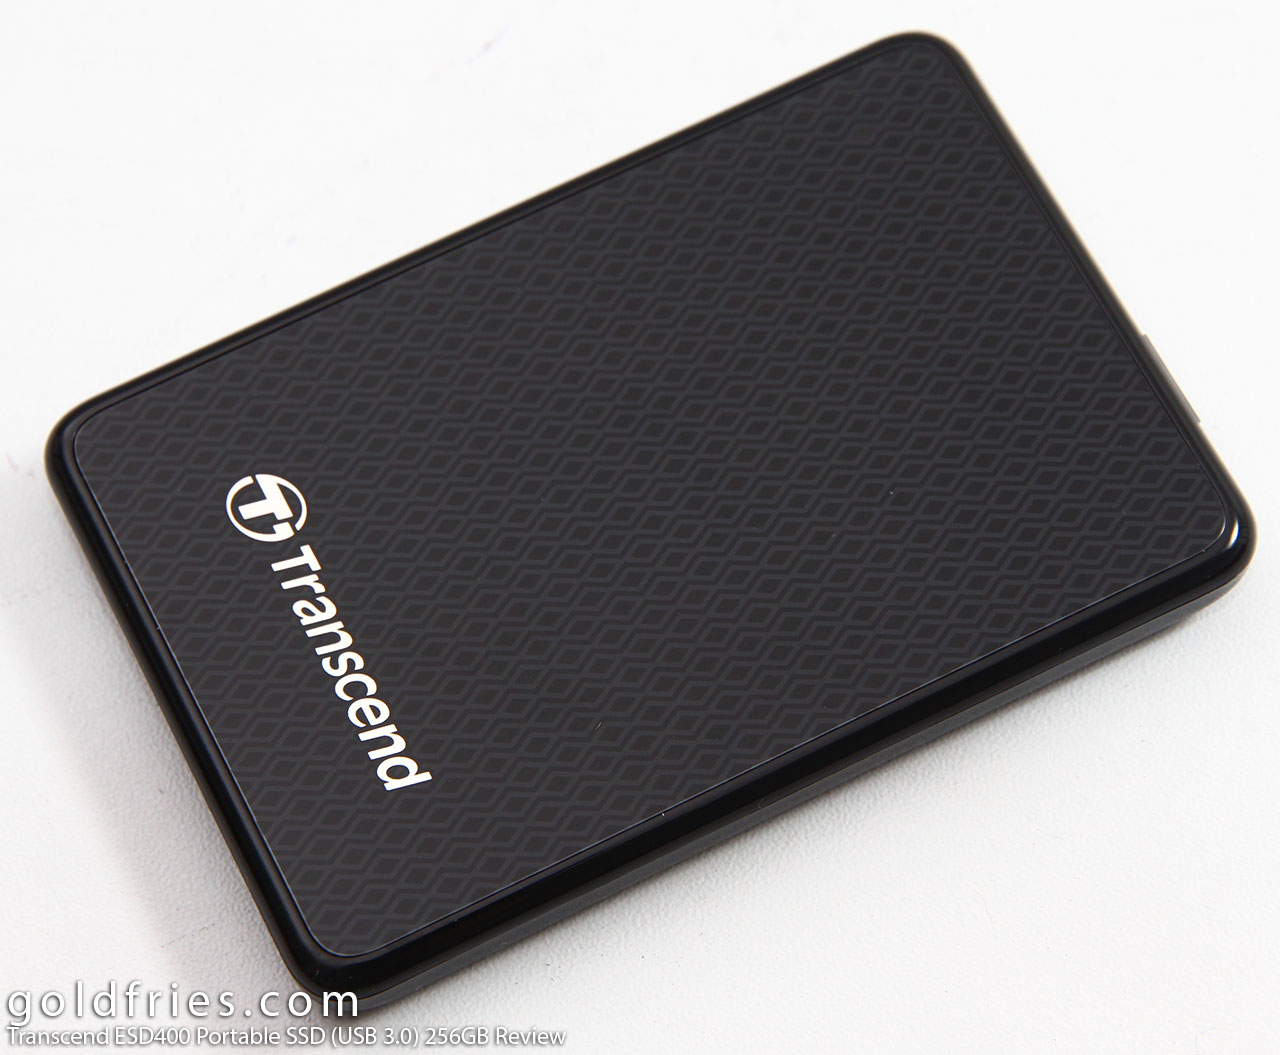 Transcend ESD400 Portable SSD (USB 3.0) 256GB Review